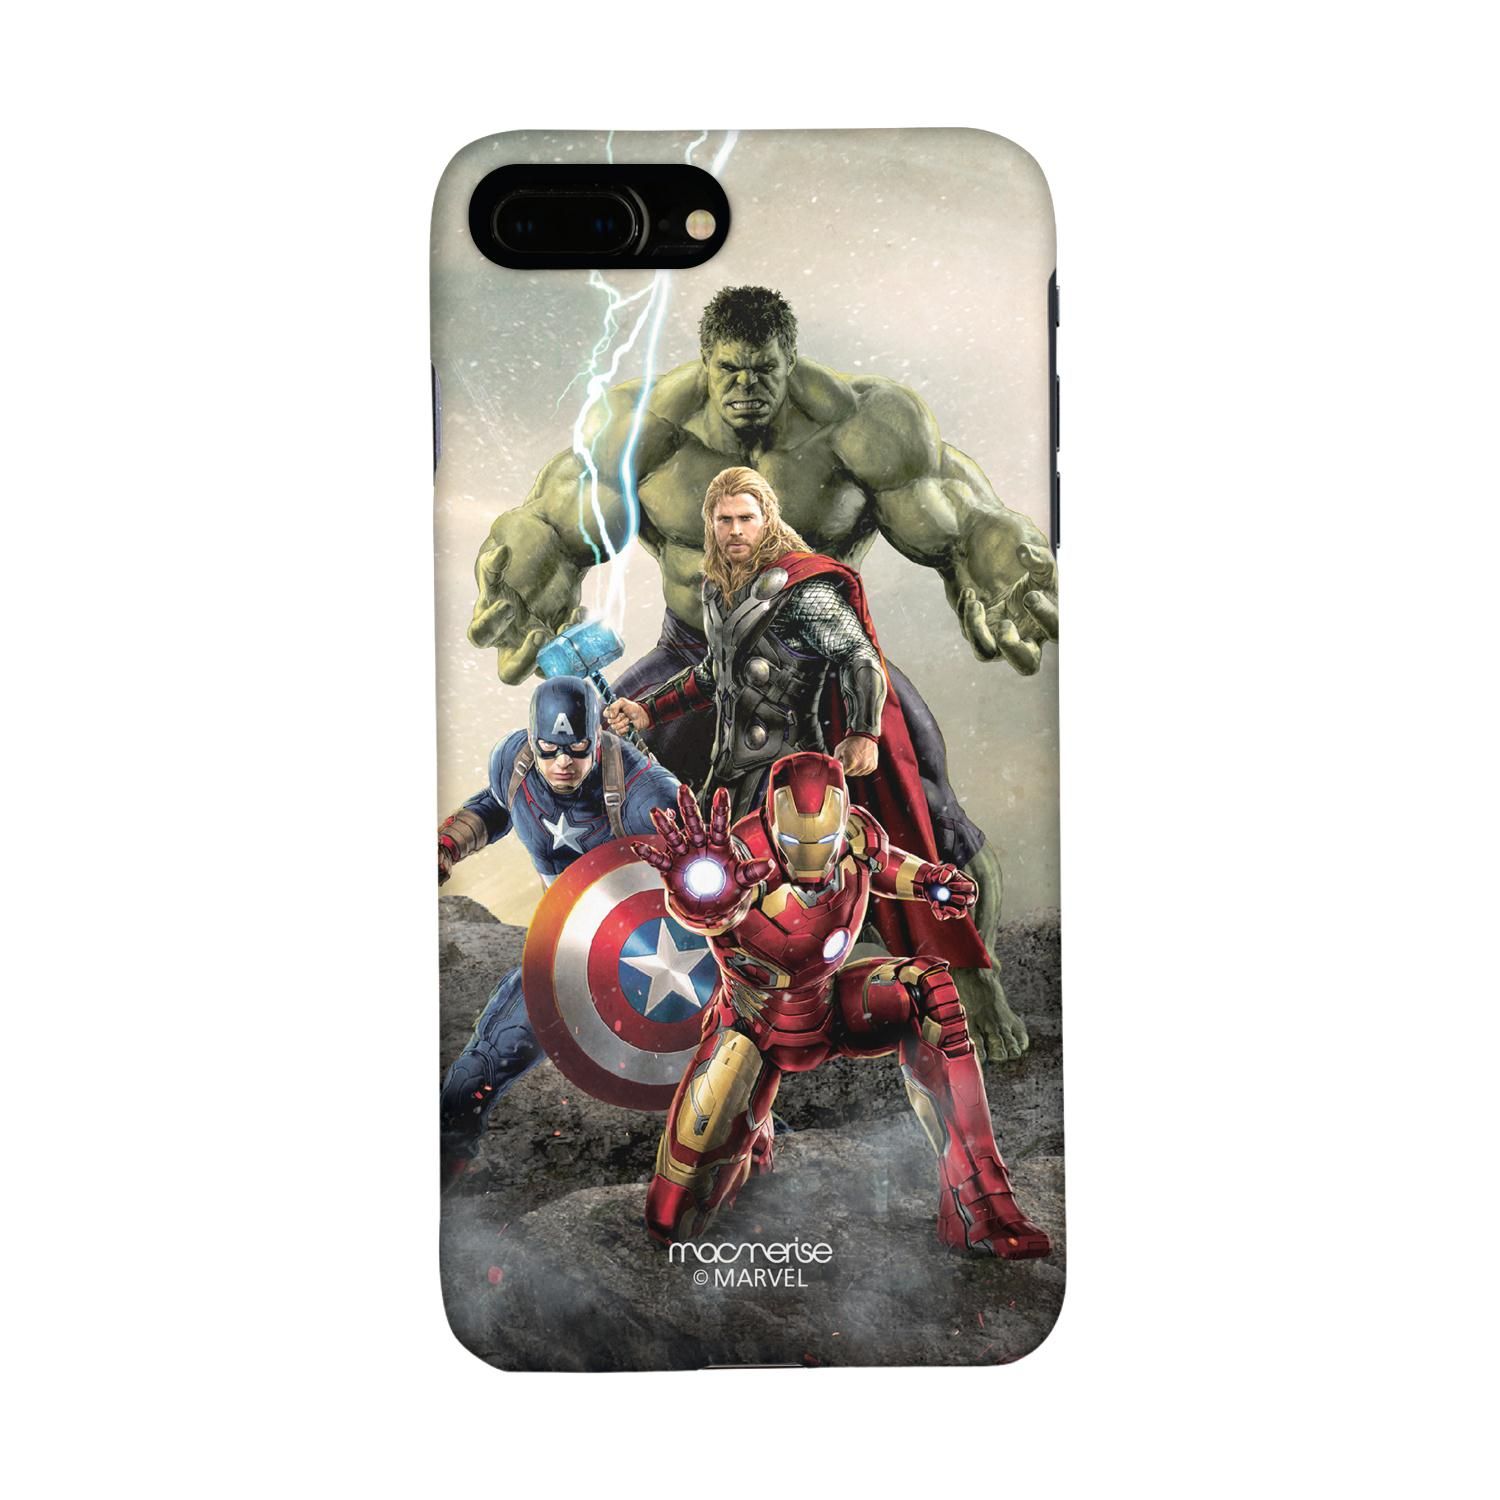 Buy Time to Avenge - Sleek Phone Case for iPhone 7 Plus Online